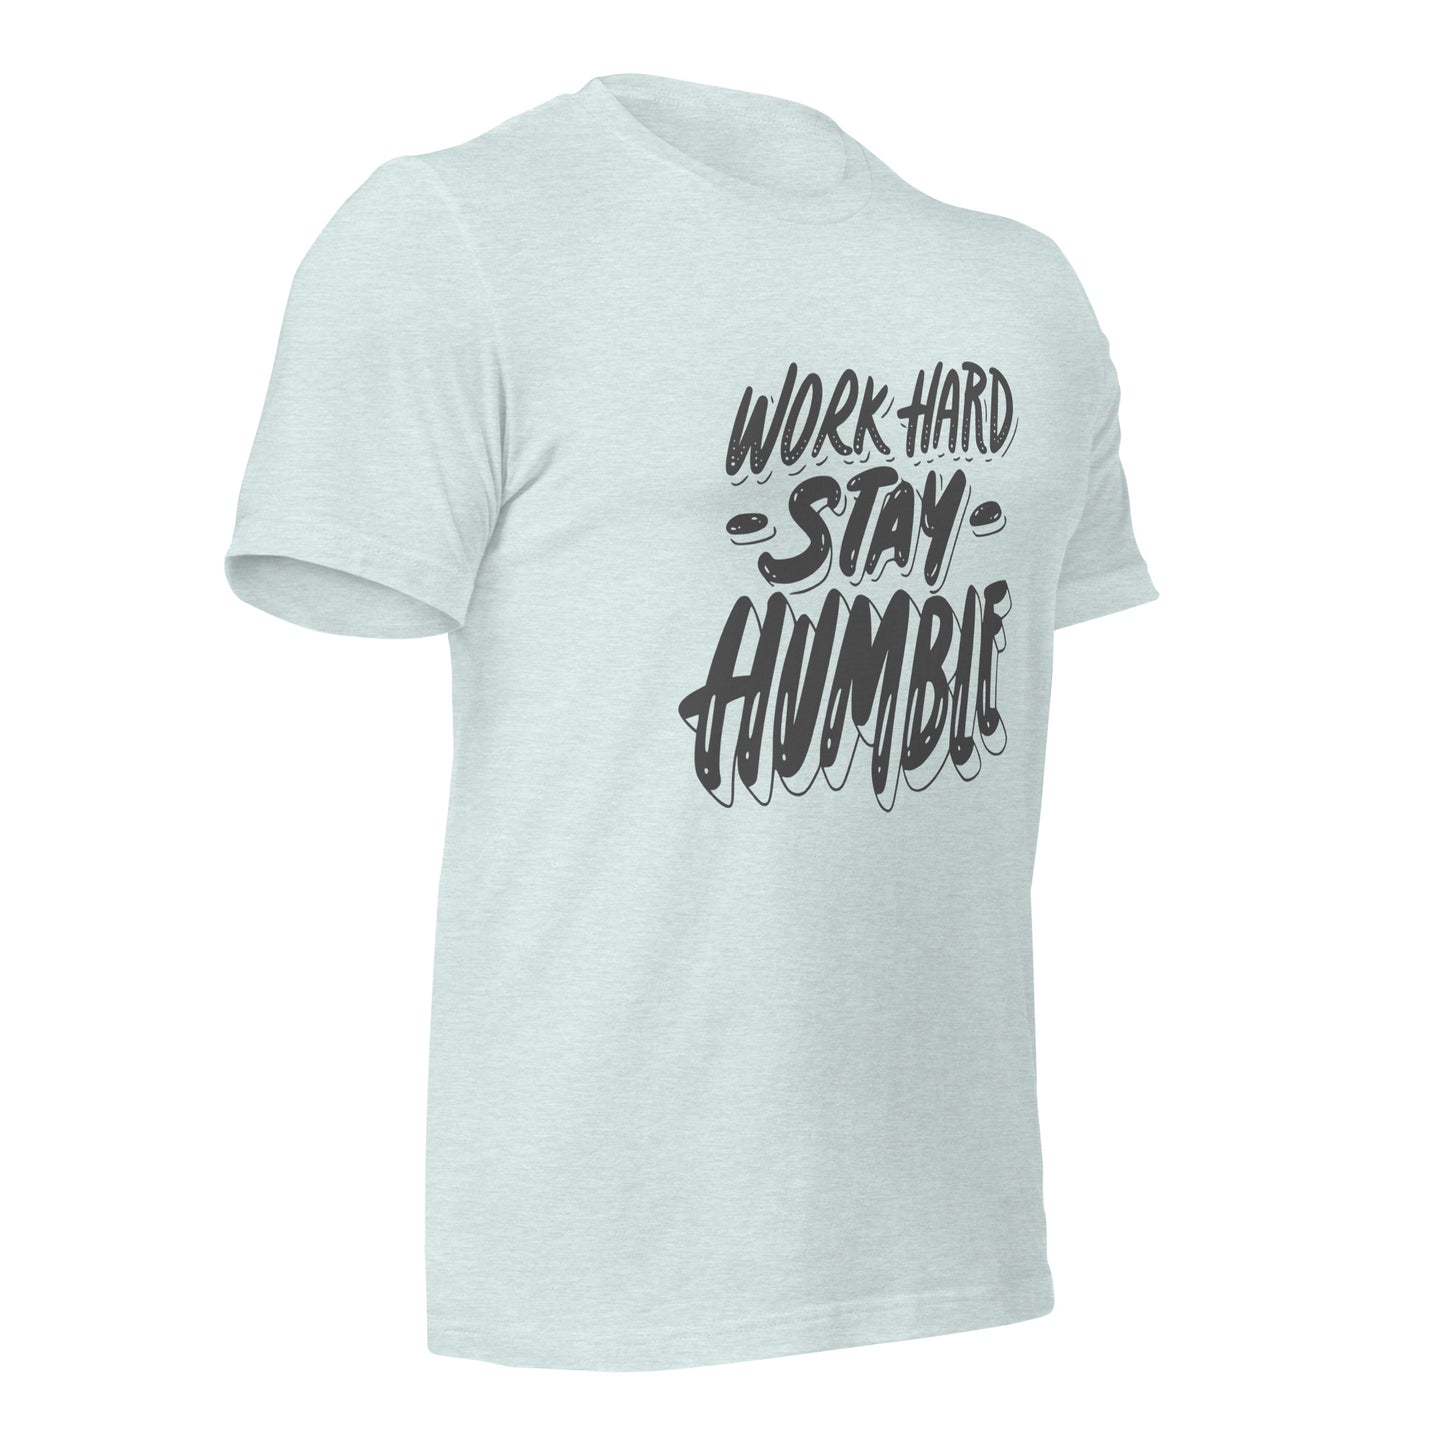 "Work Hard & Stay Humble" T-Shirt - Weave Got Gifts - Unique Gifts You Won’t Find Anywhere Else!